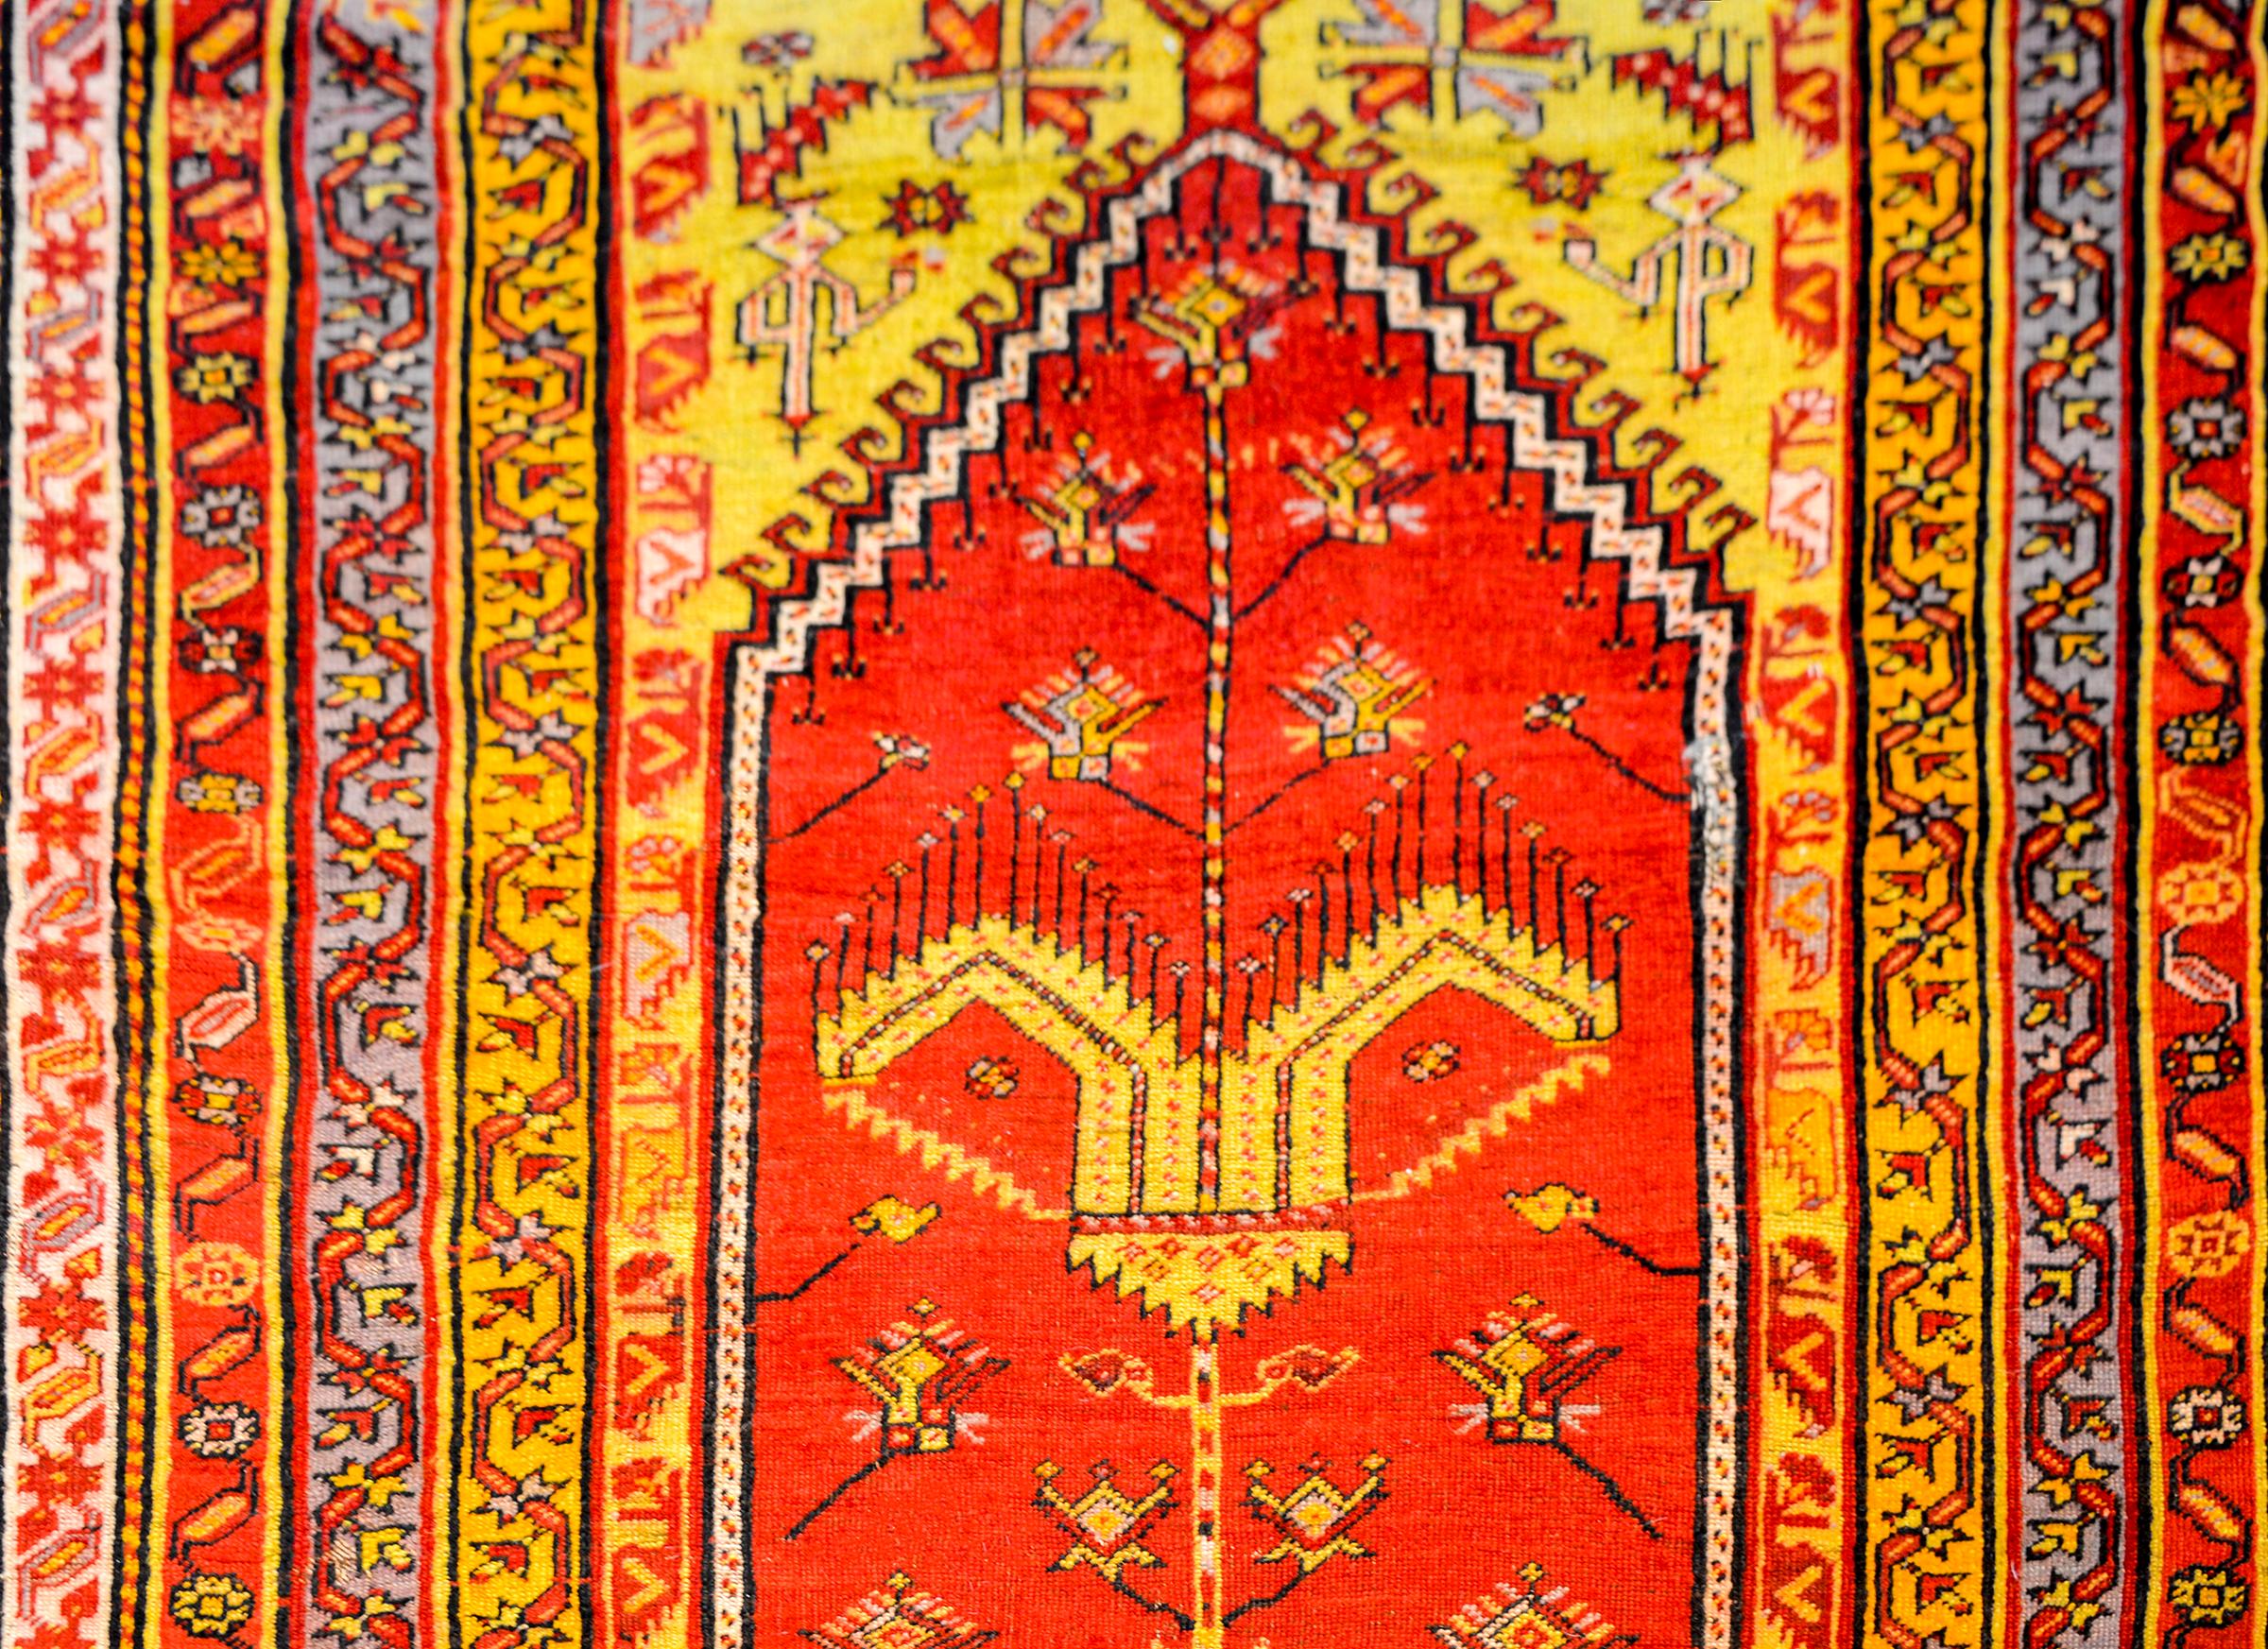 A wonderful early 20th century Turkish prayer rug with a beautiful stylized tree-of-life pattern amidst a field of flowers on a bold crimson background surrounded by multiple thin petite patterned stripes woven in multiple colors.